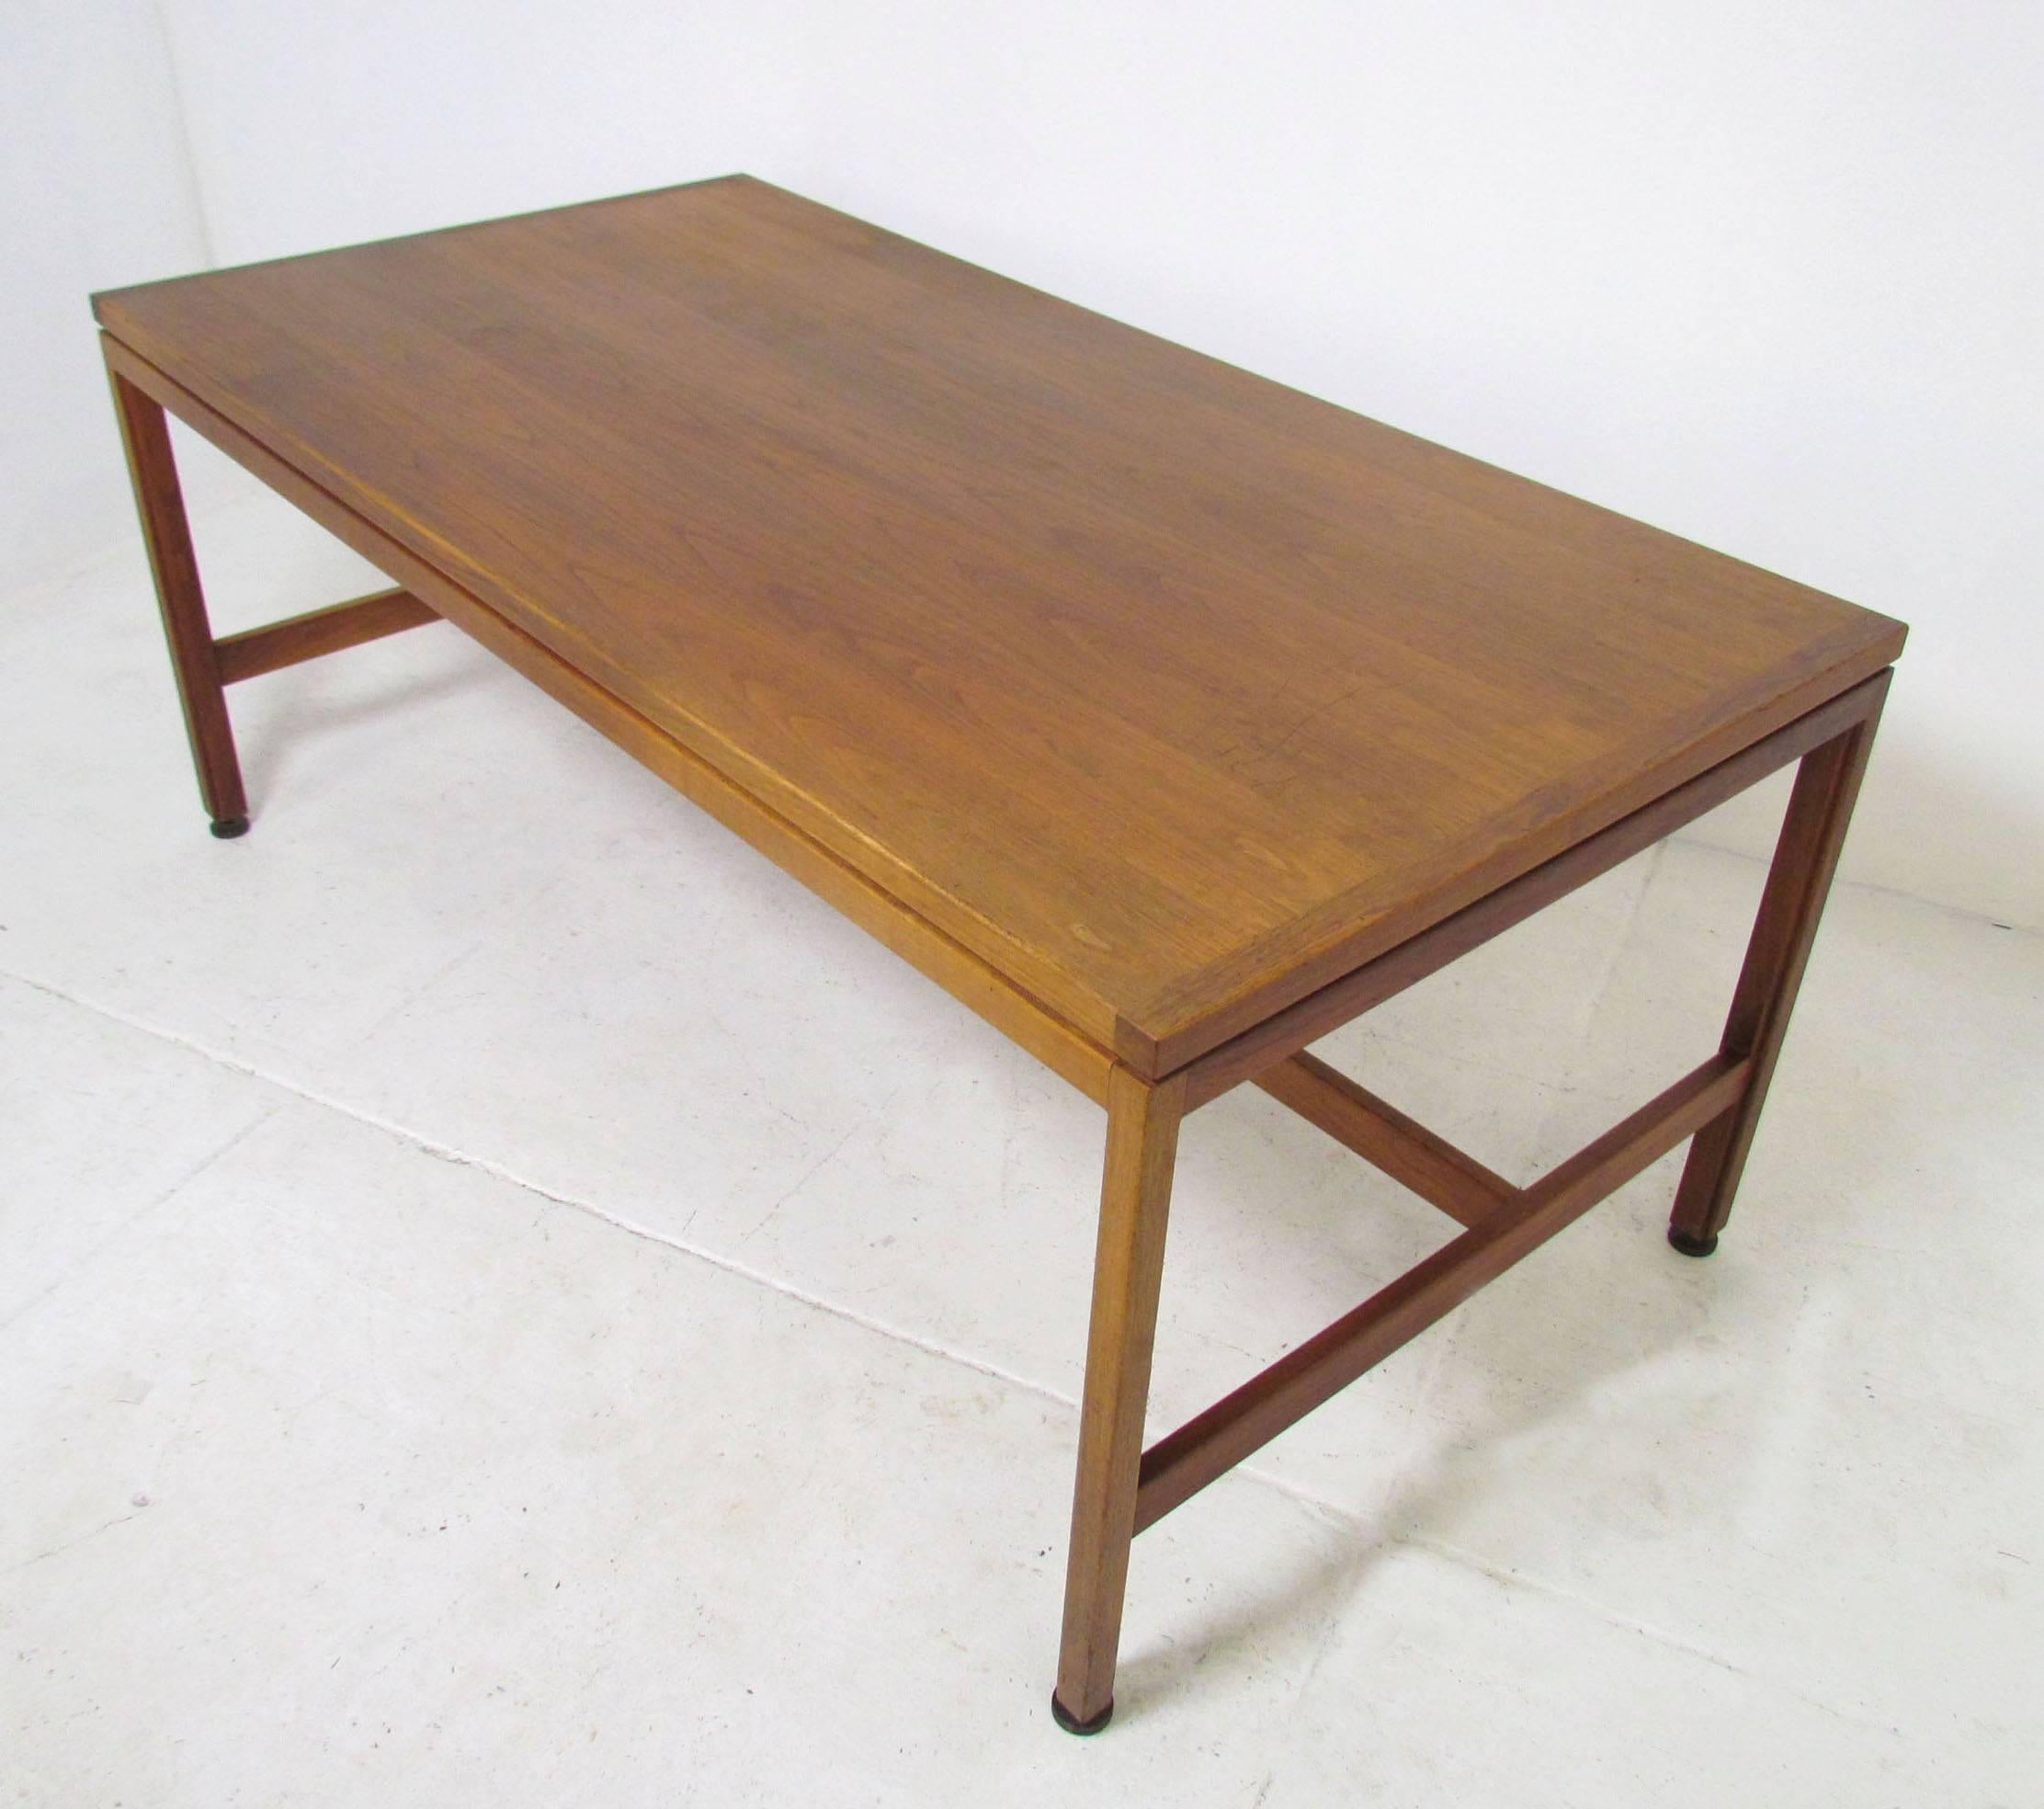 Spacious Mid-Century architect's desk in walnut with sleek modernist lines by Jens Risom, circa 1960s. Retains all original adjustable bronze glides. 28.75" high as shown.